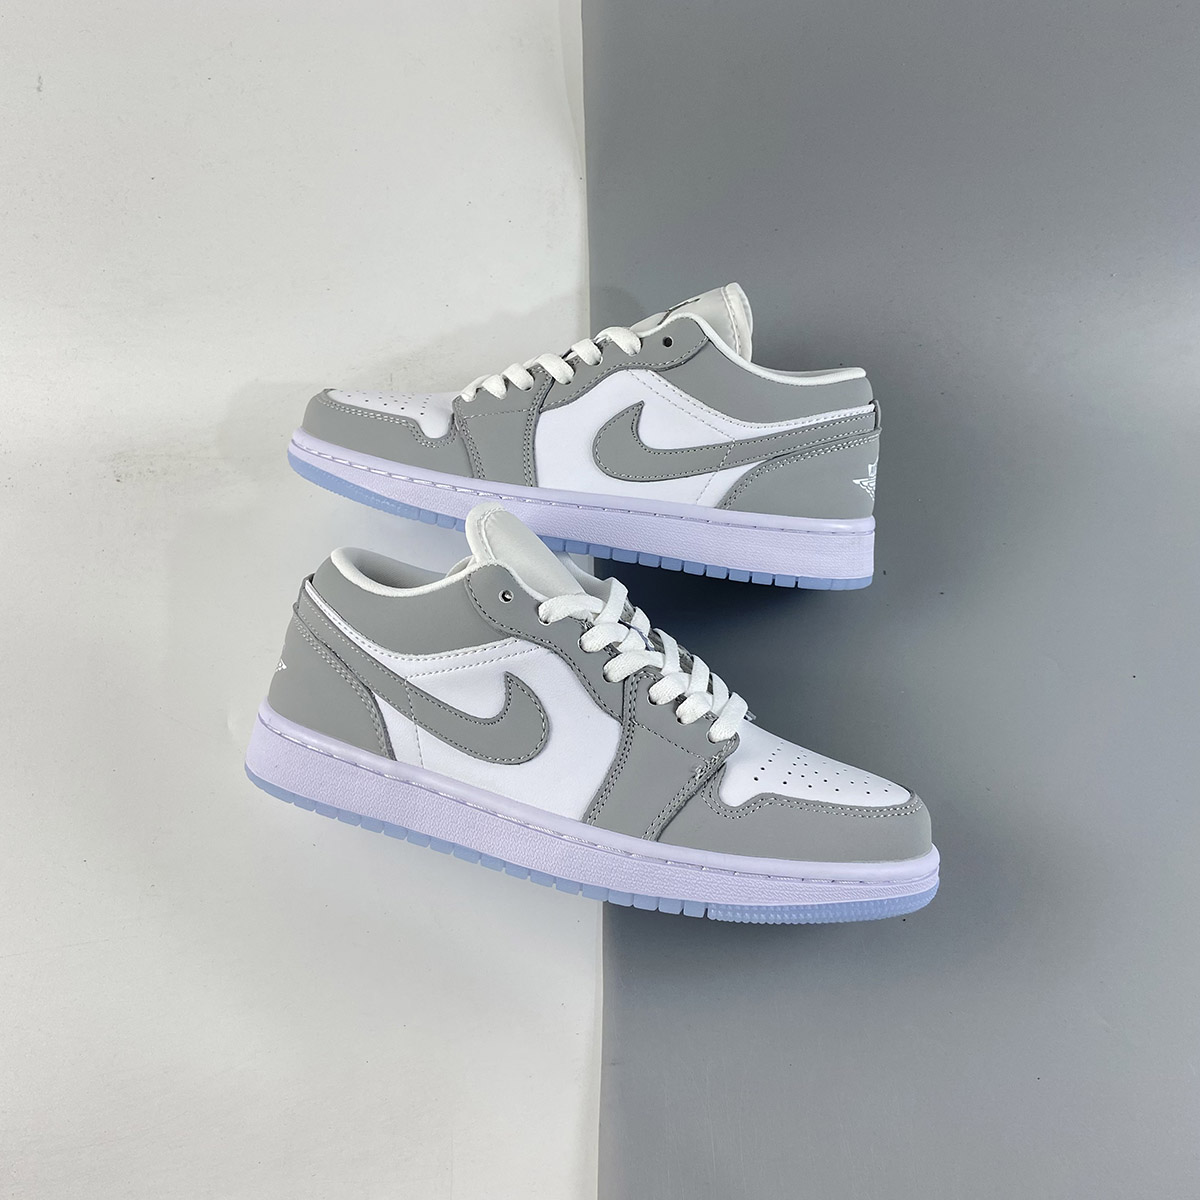 Air Jordan 1 Low White Wolf Grey DC0774-105 For Sale – The Sole Line